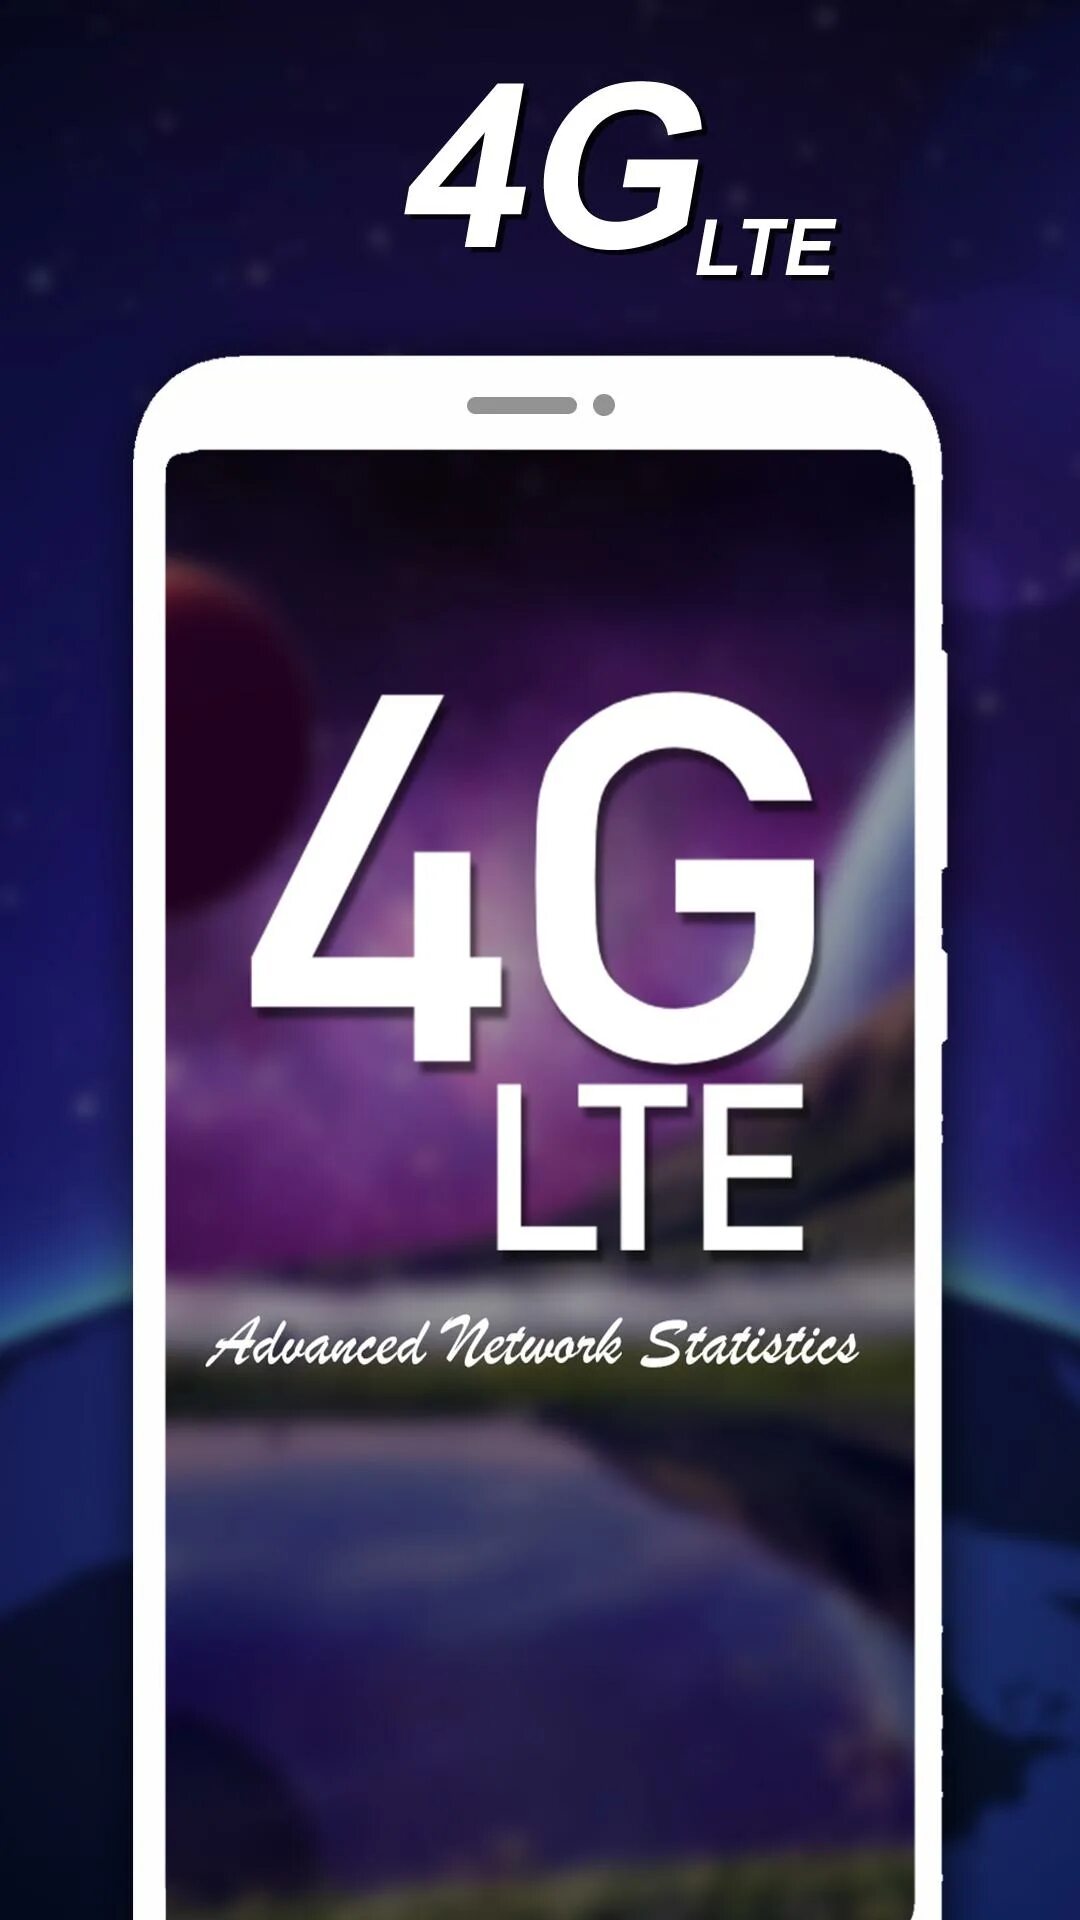 4g volte. 4g LTE. LTE only. Volte картинки. Force 4g 5g LTE only huvave.